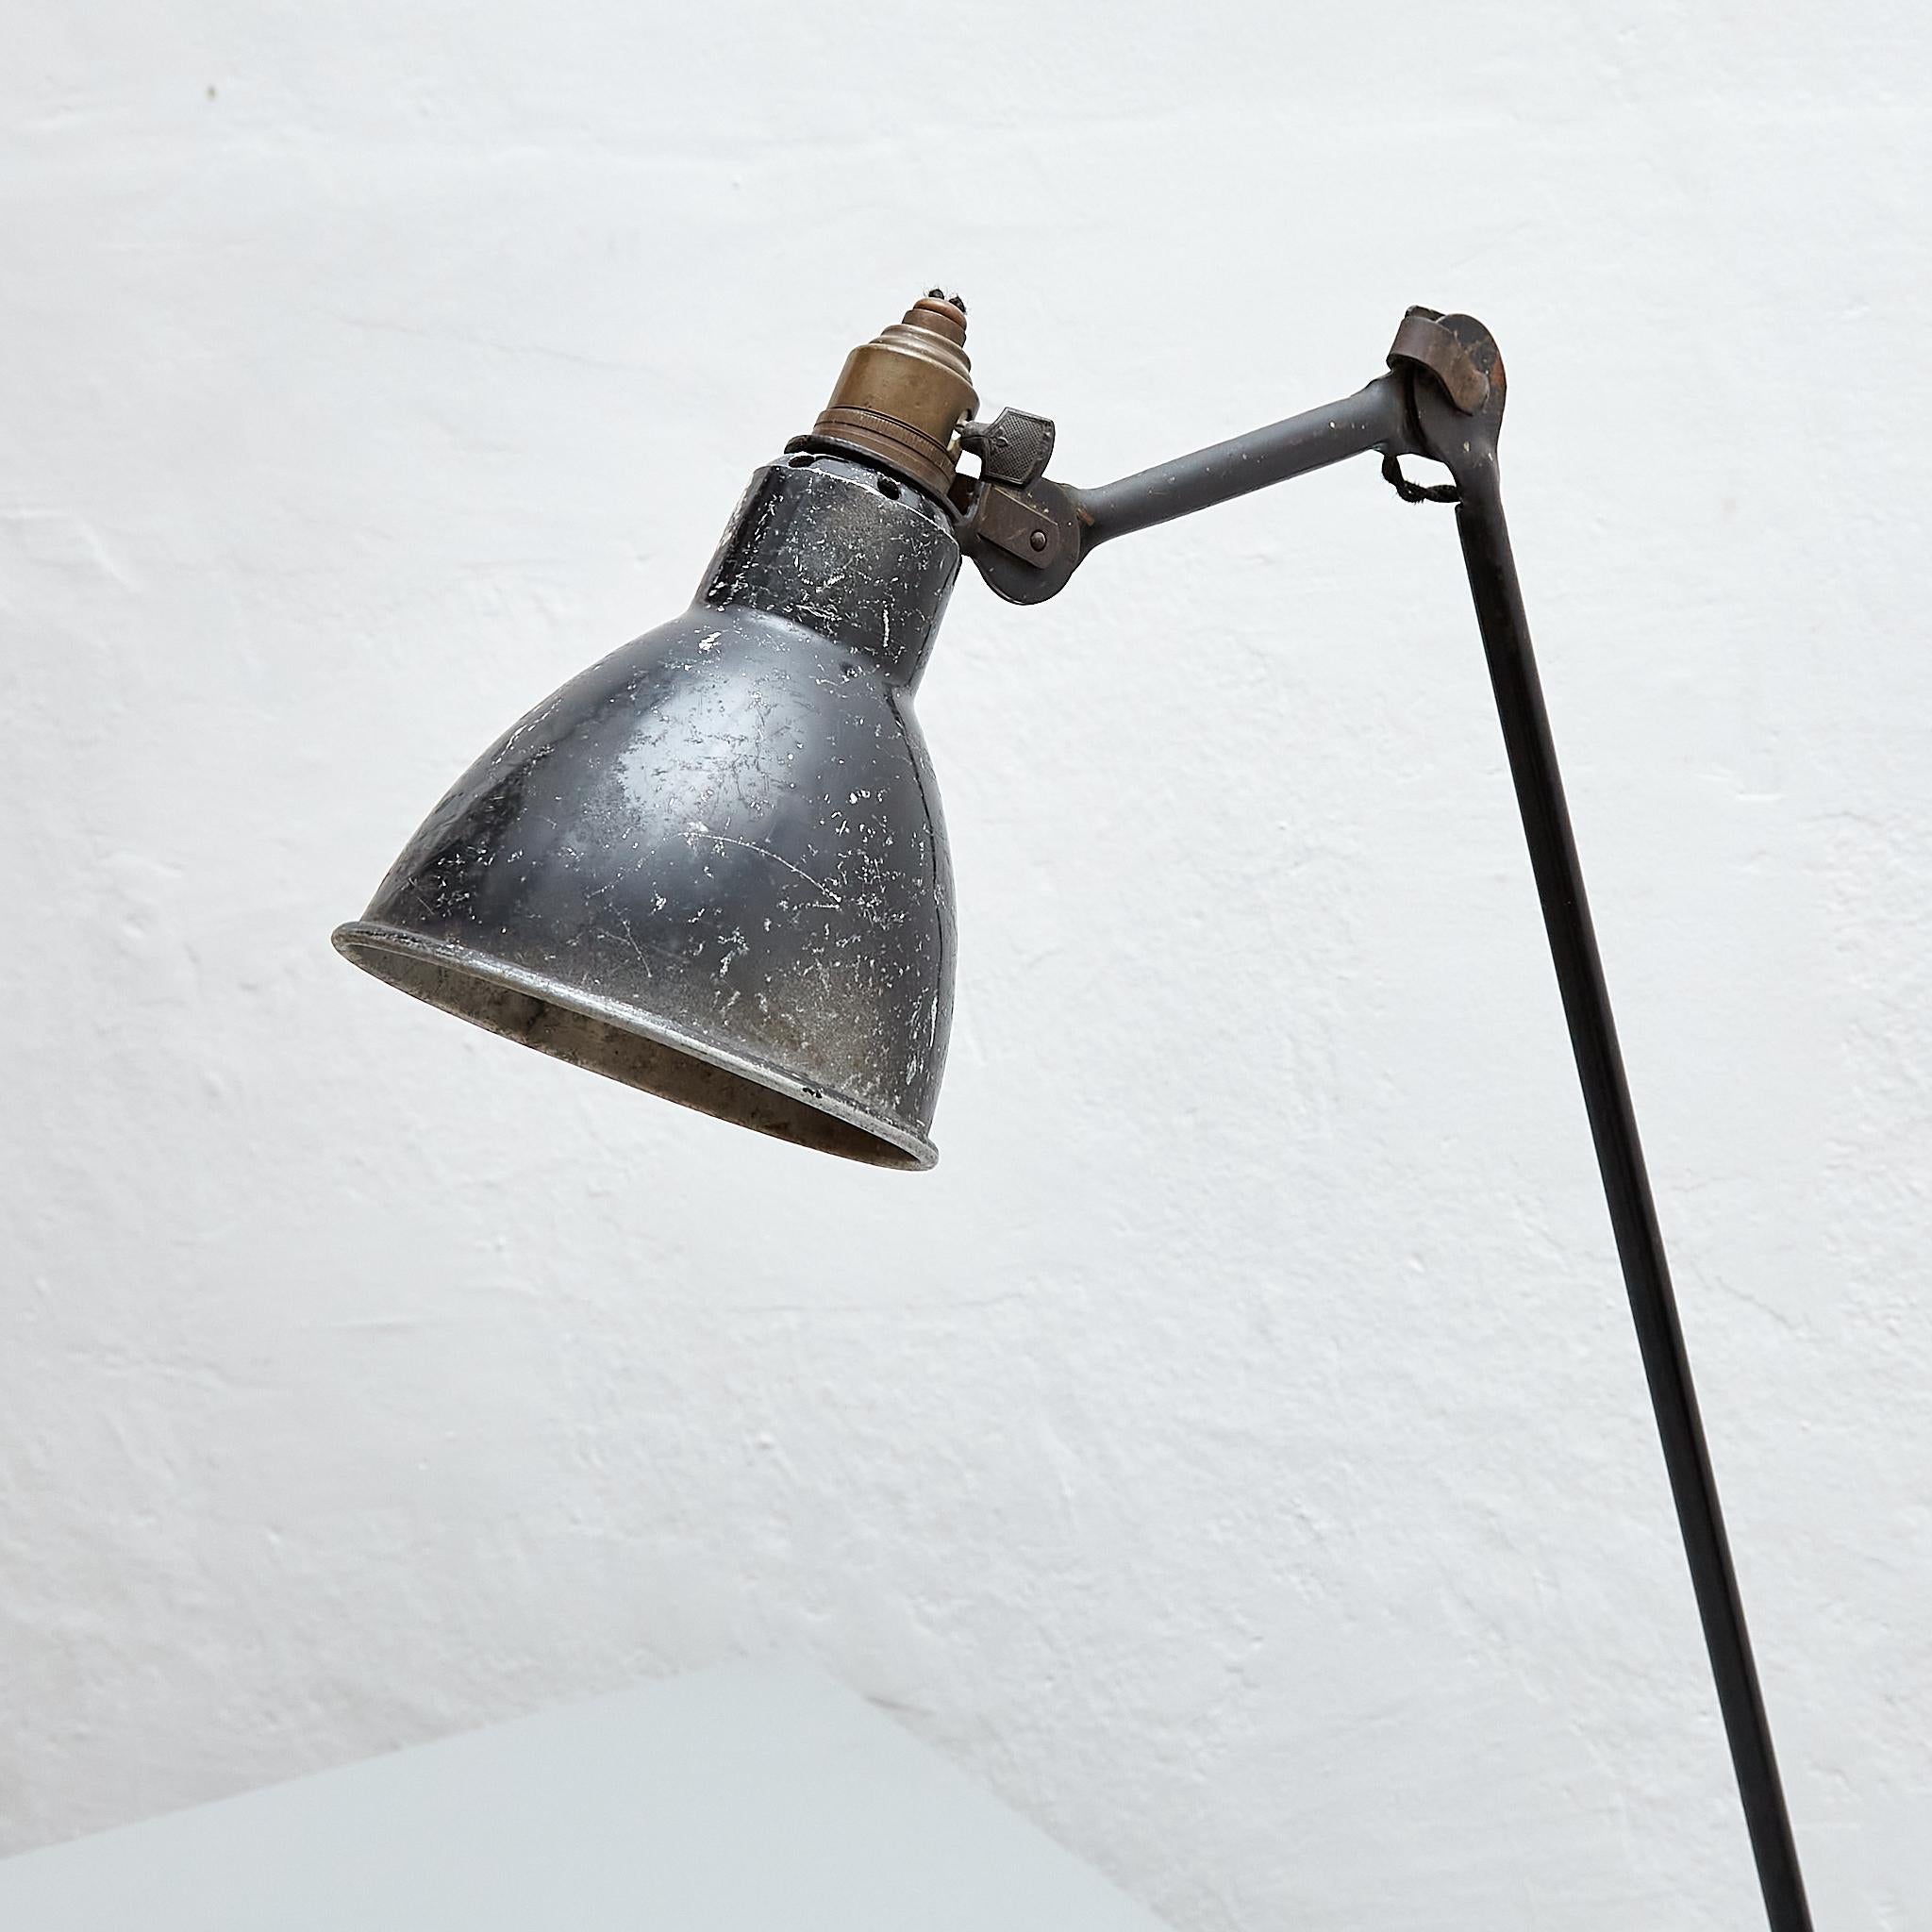 Table lamp Lampe Gras No. 201 designed by Bernard-Albin Gras.

Manufactured by Gras (France), circa 1930.

In good original condition, with minor wear consistent with age and use, preserving a beautiful patina.

Materials:
Aluminium and